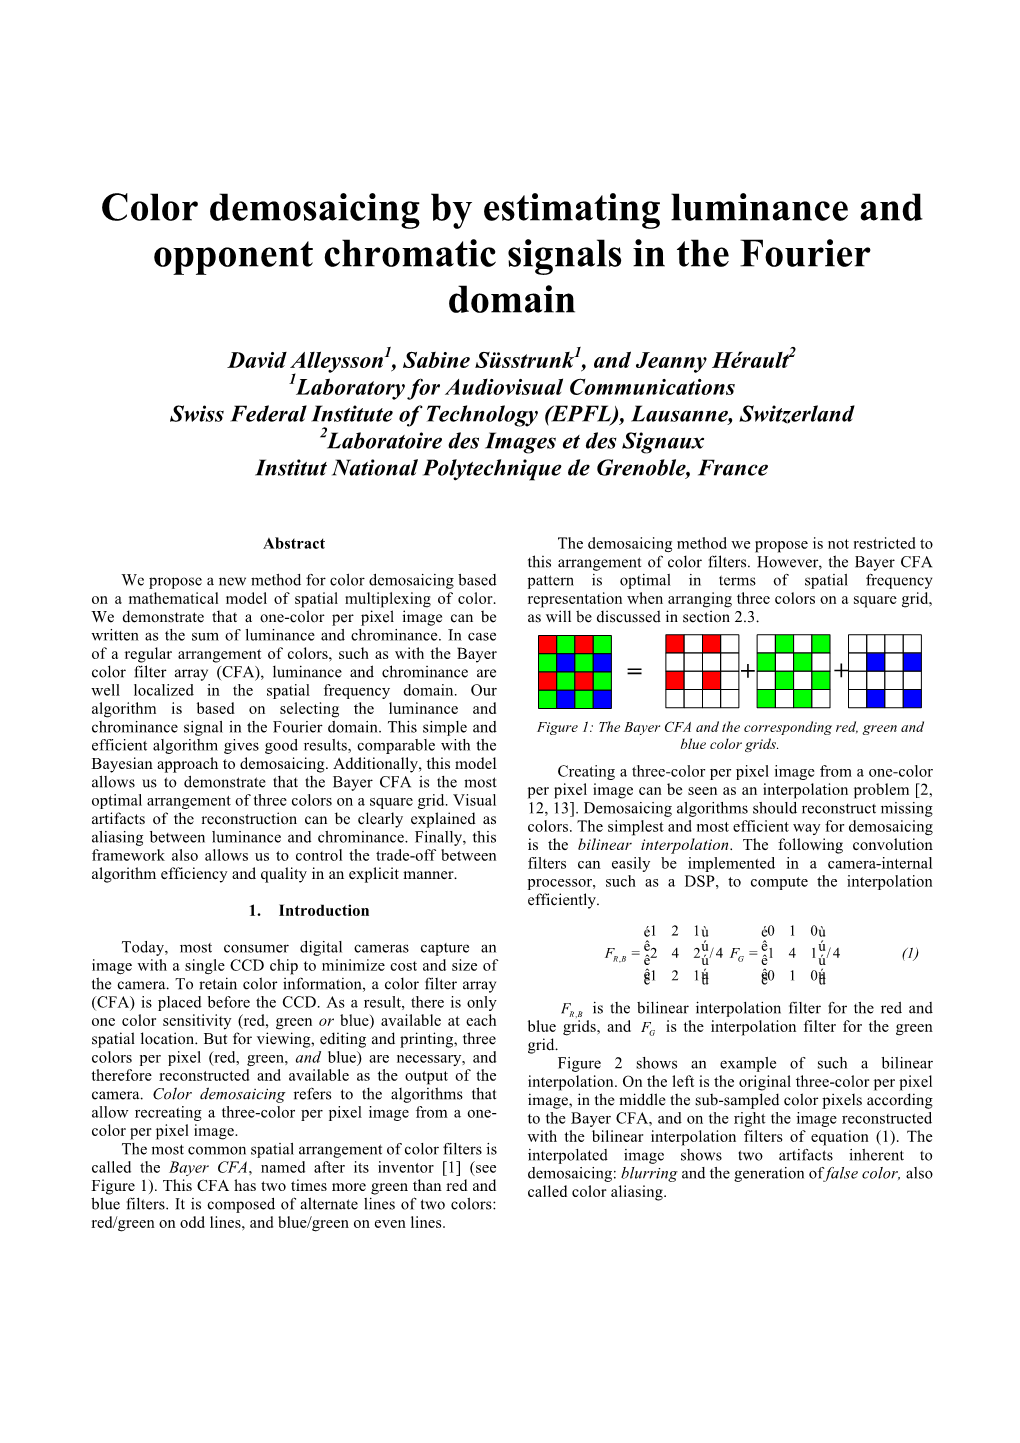 Color Demosaicing by Estimating Luminance and Opponent Chromatic Signals in the Fourier Domain